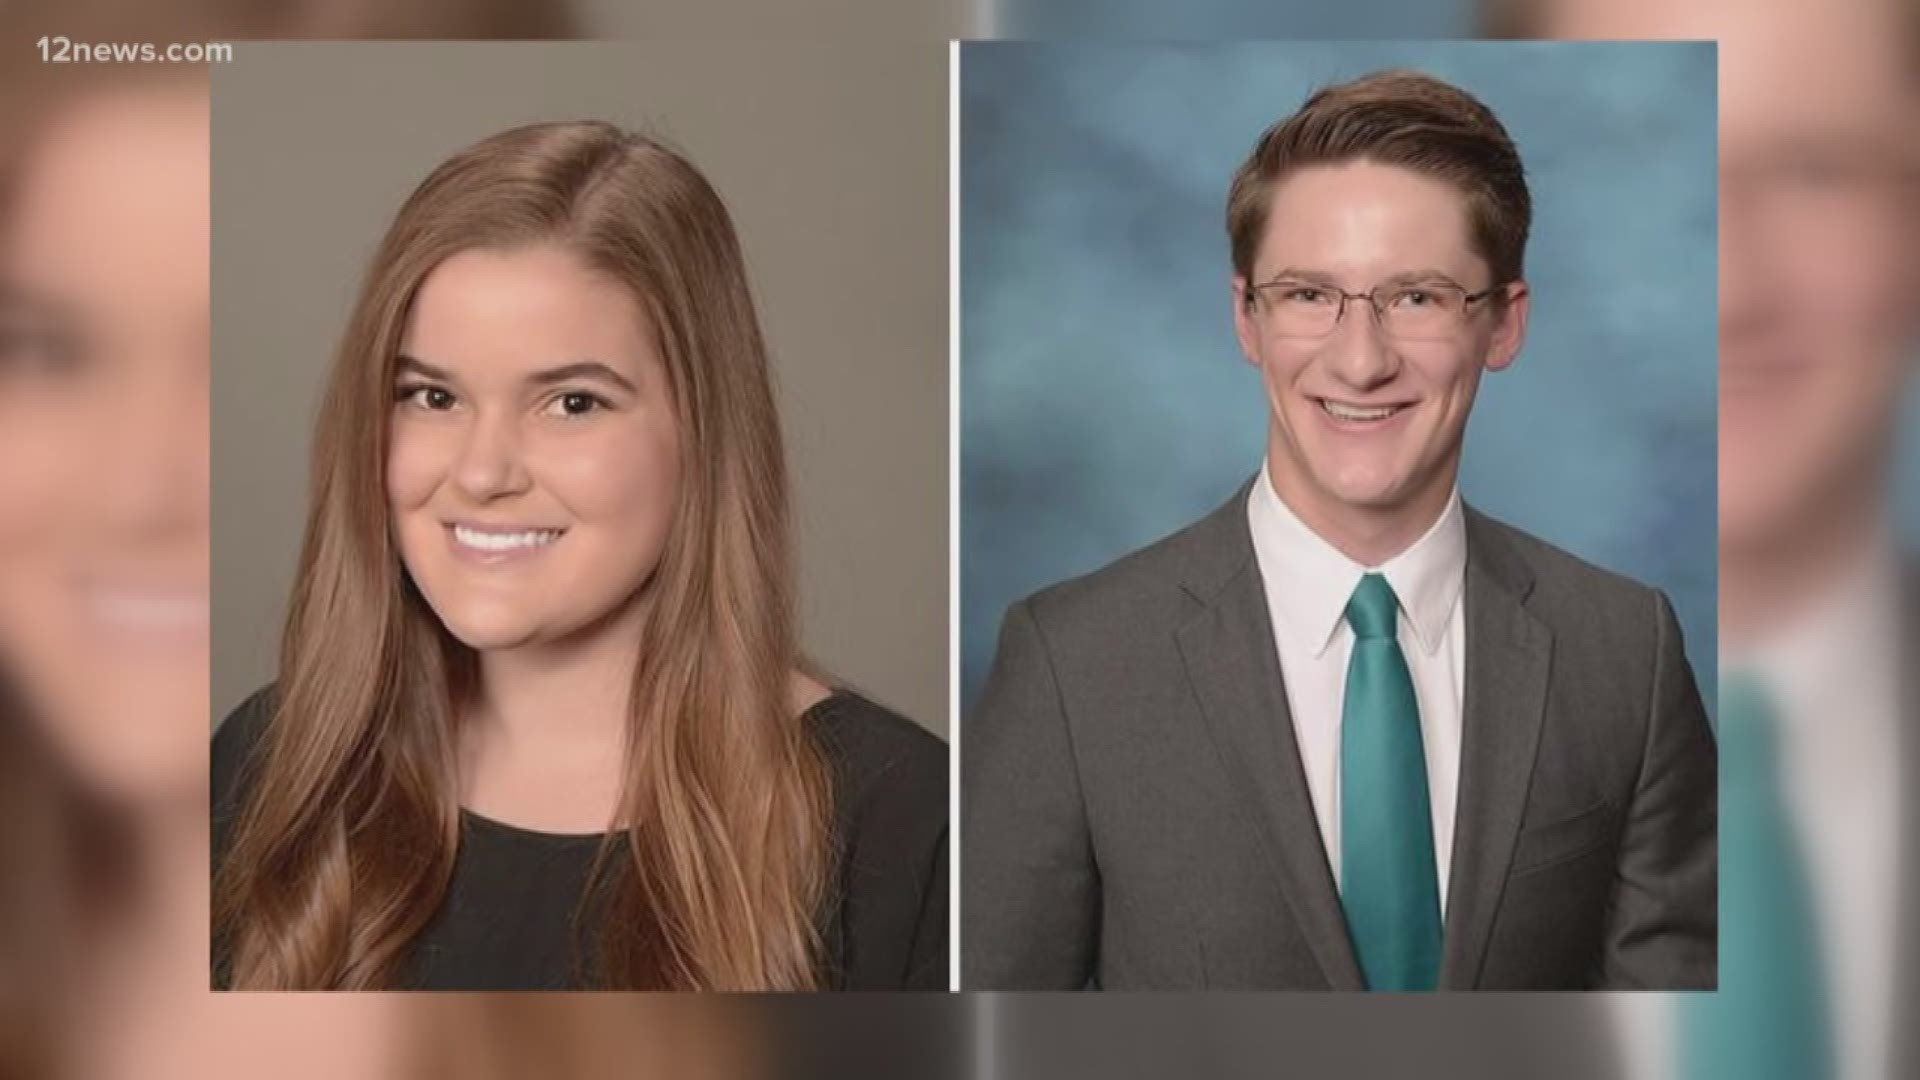 Laren Paxton, a senior at Pinnacle High School, and Kyle Kline, a senior at Paradise Valley High School, are two of 22 students across Arizona who received the highly competitive merit-based awards.